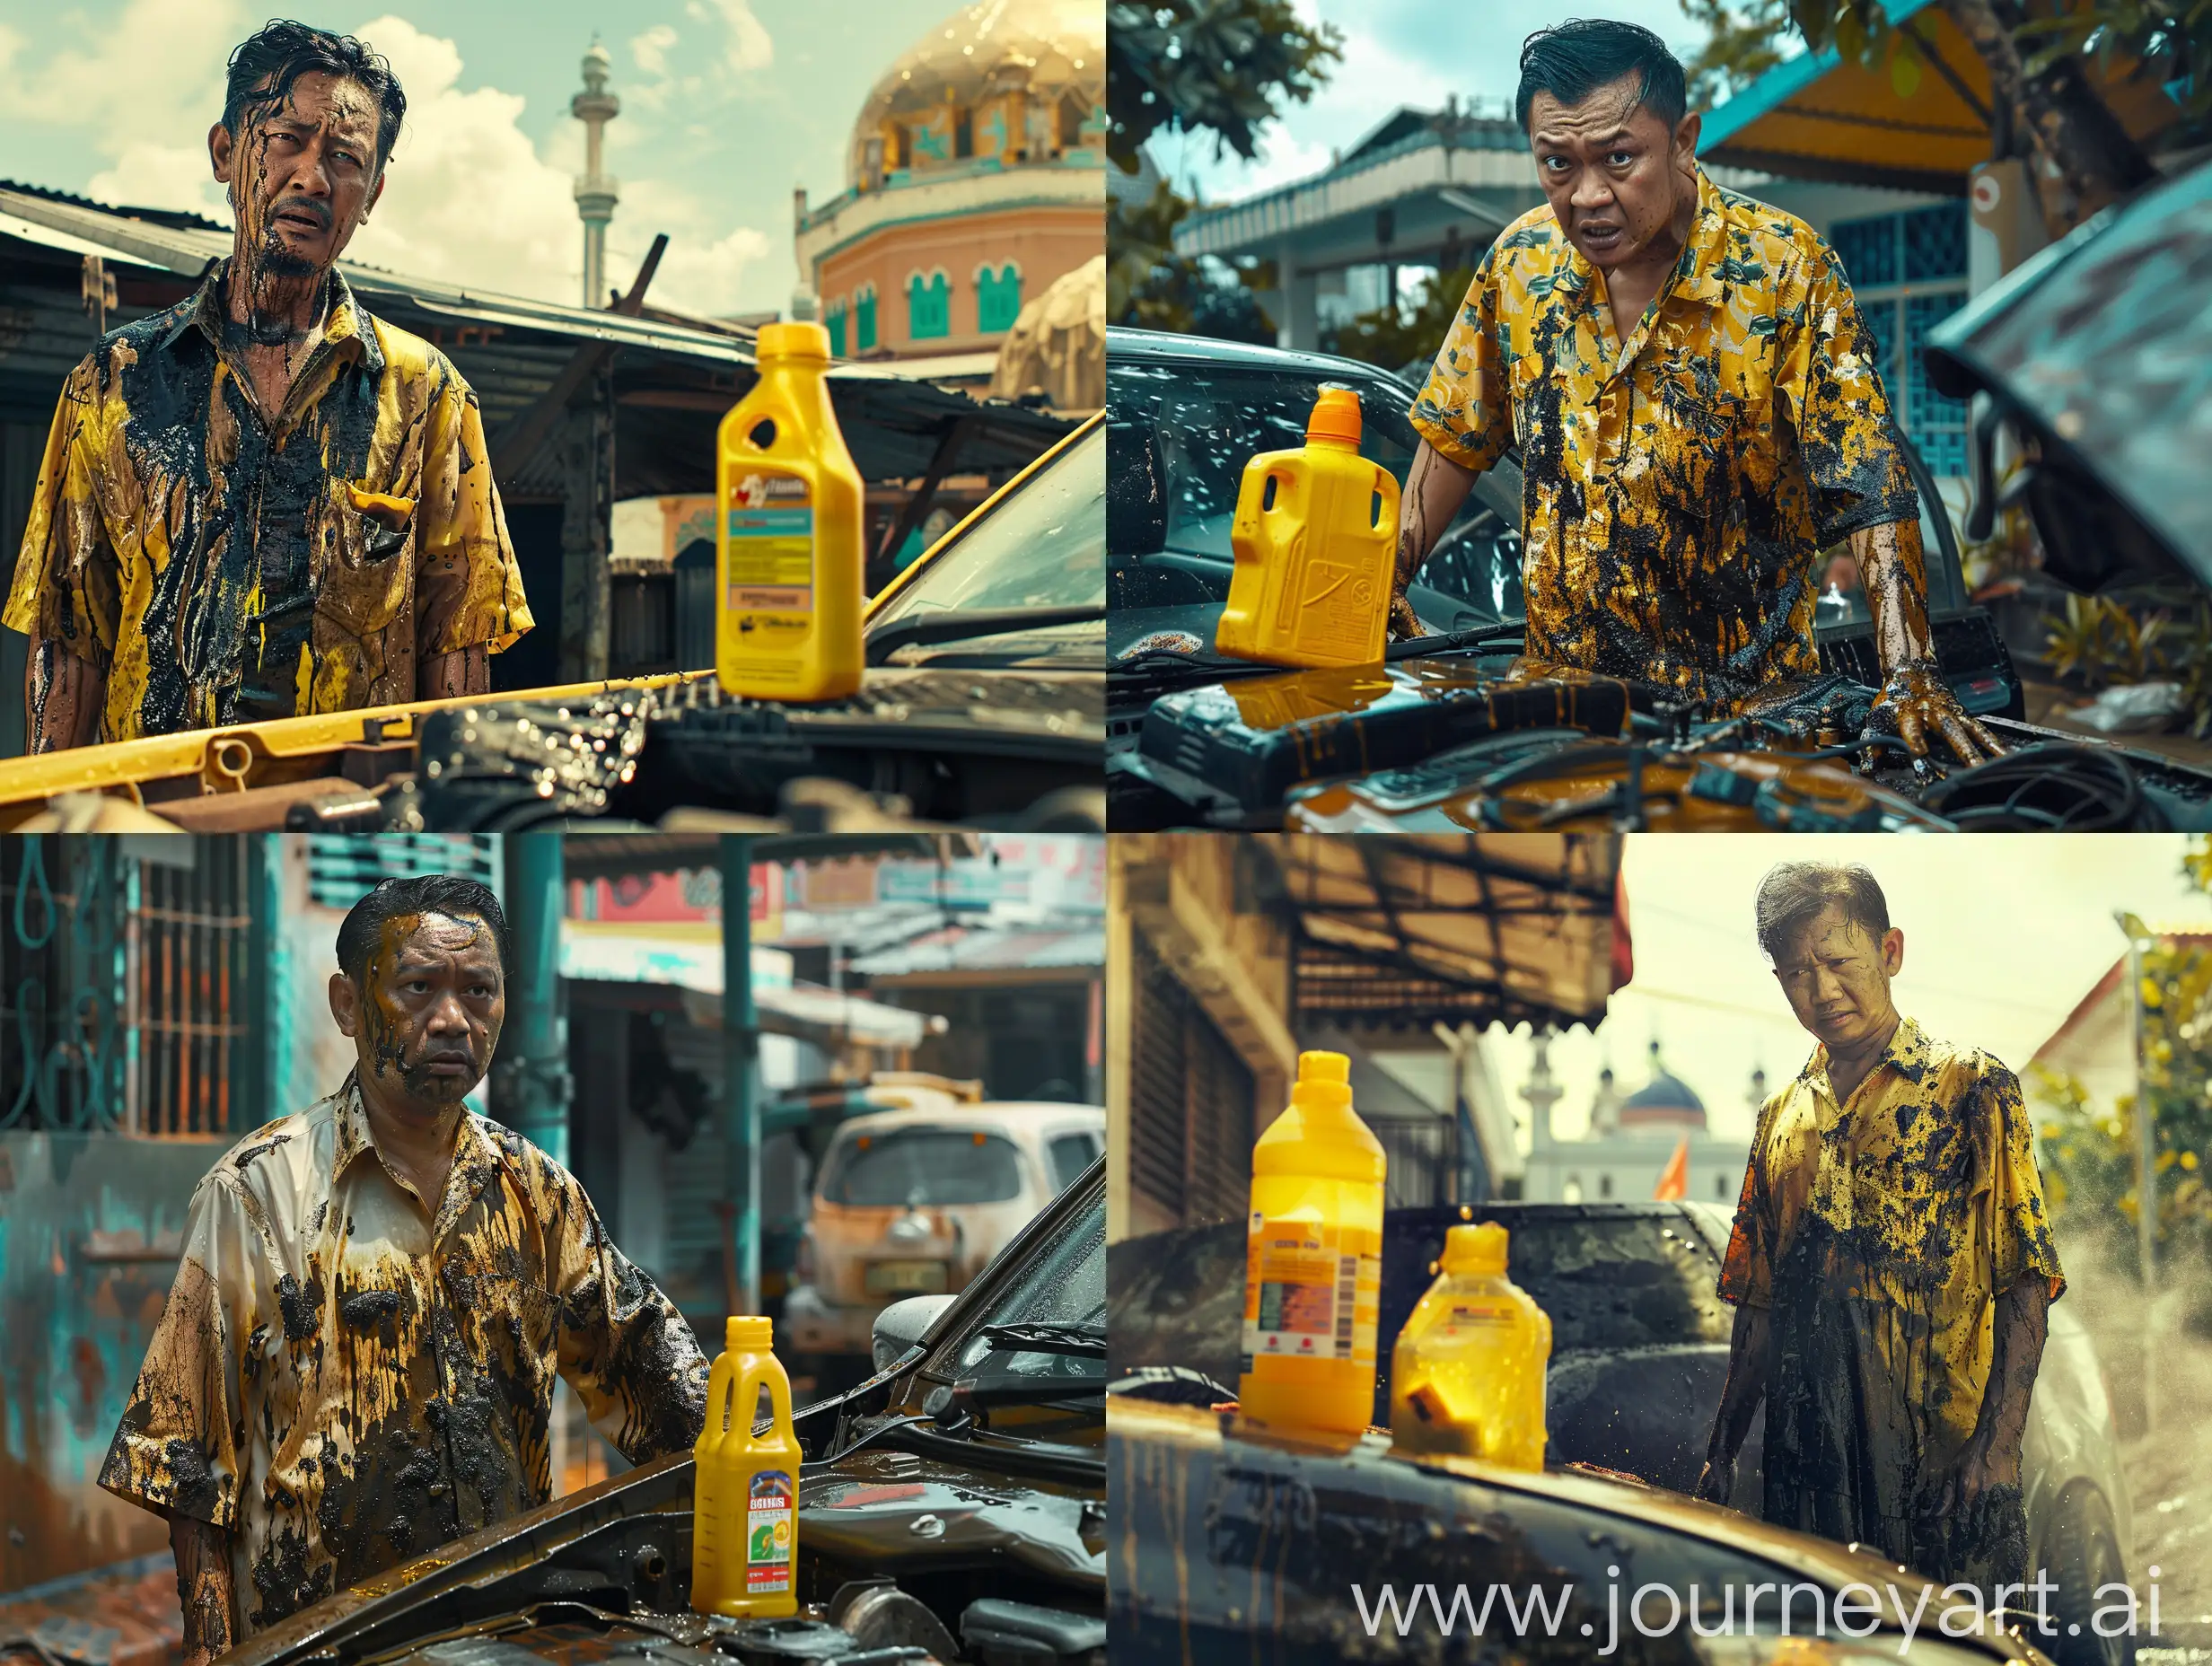 Man-in-Baju-Melayu-Covered-in-Engine-Oil-at-Mosque